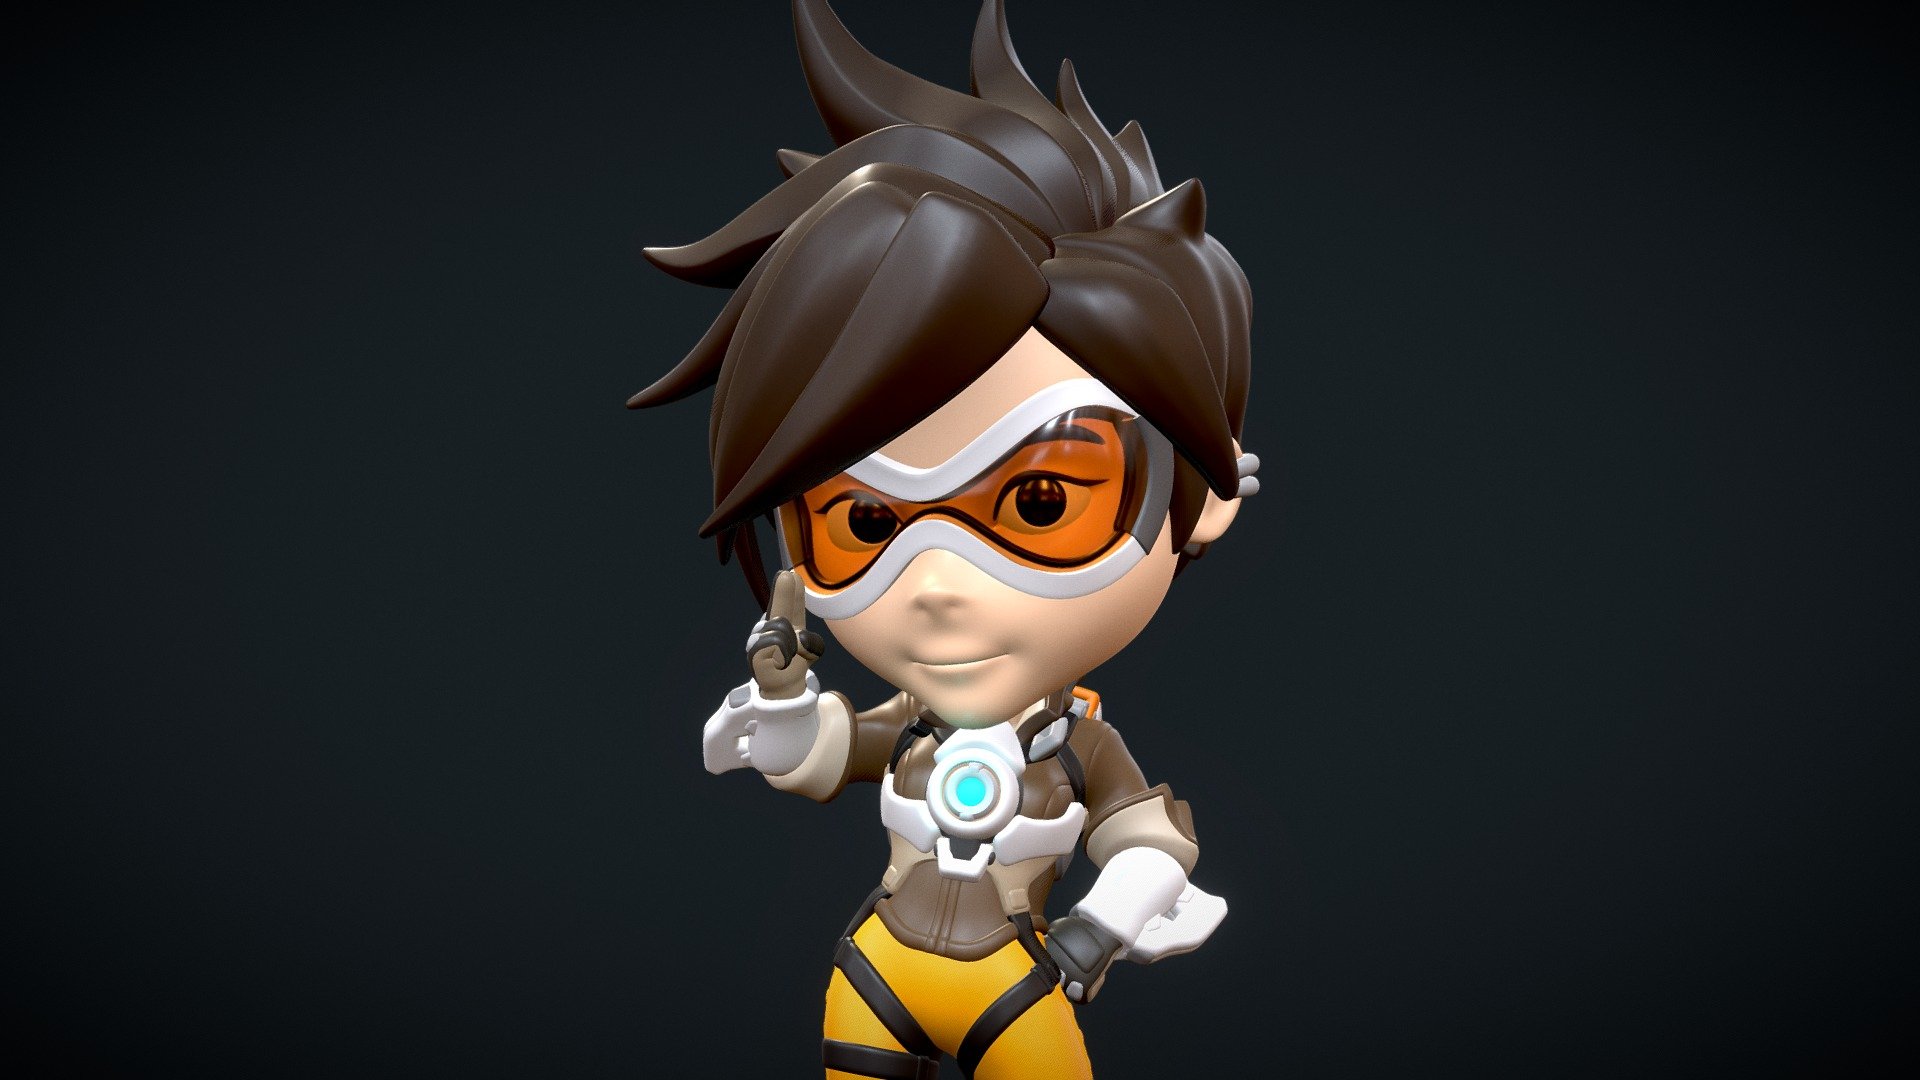 statue figure video game digital pattern 3D printing Overwatch Tracer Lifesize Head Sculpt 3D Print STL Files Download files